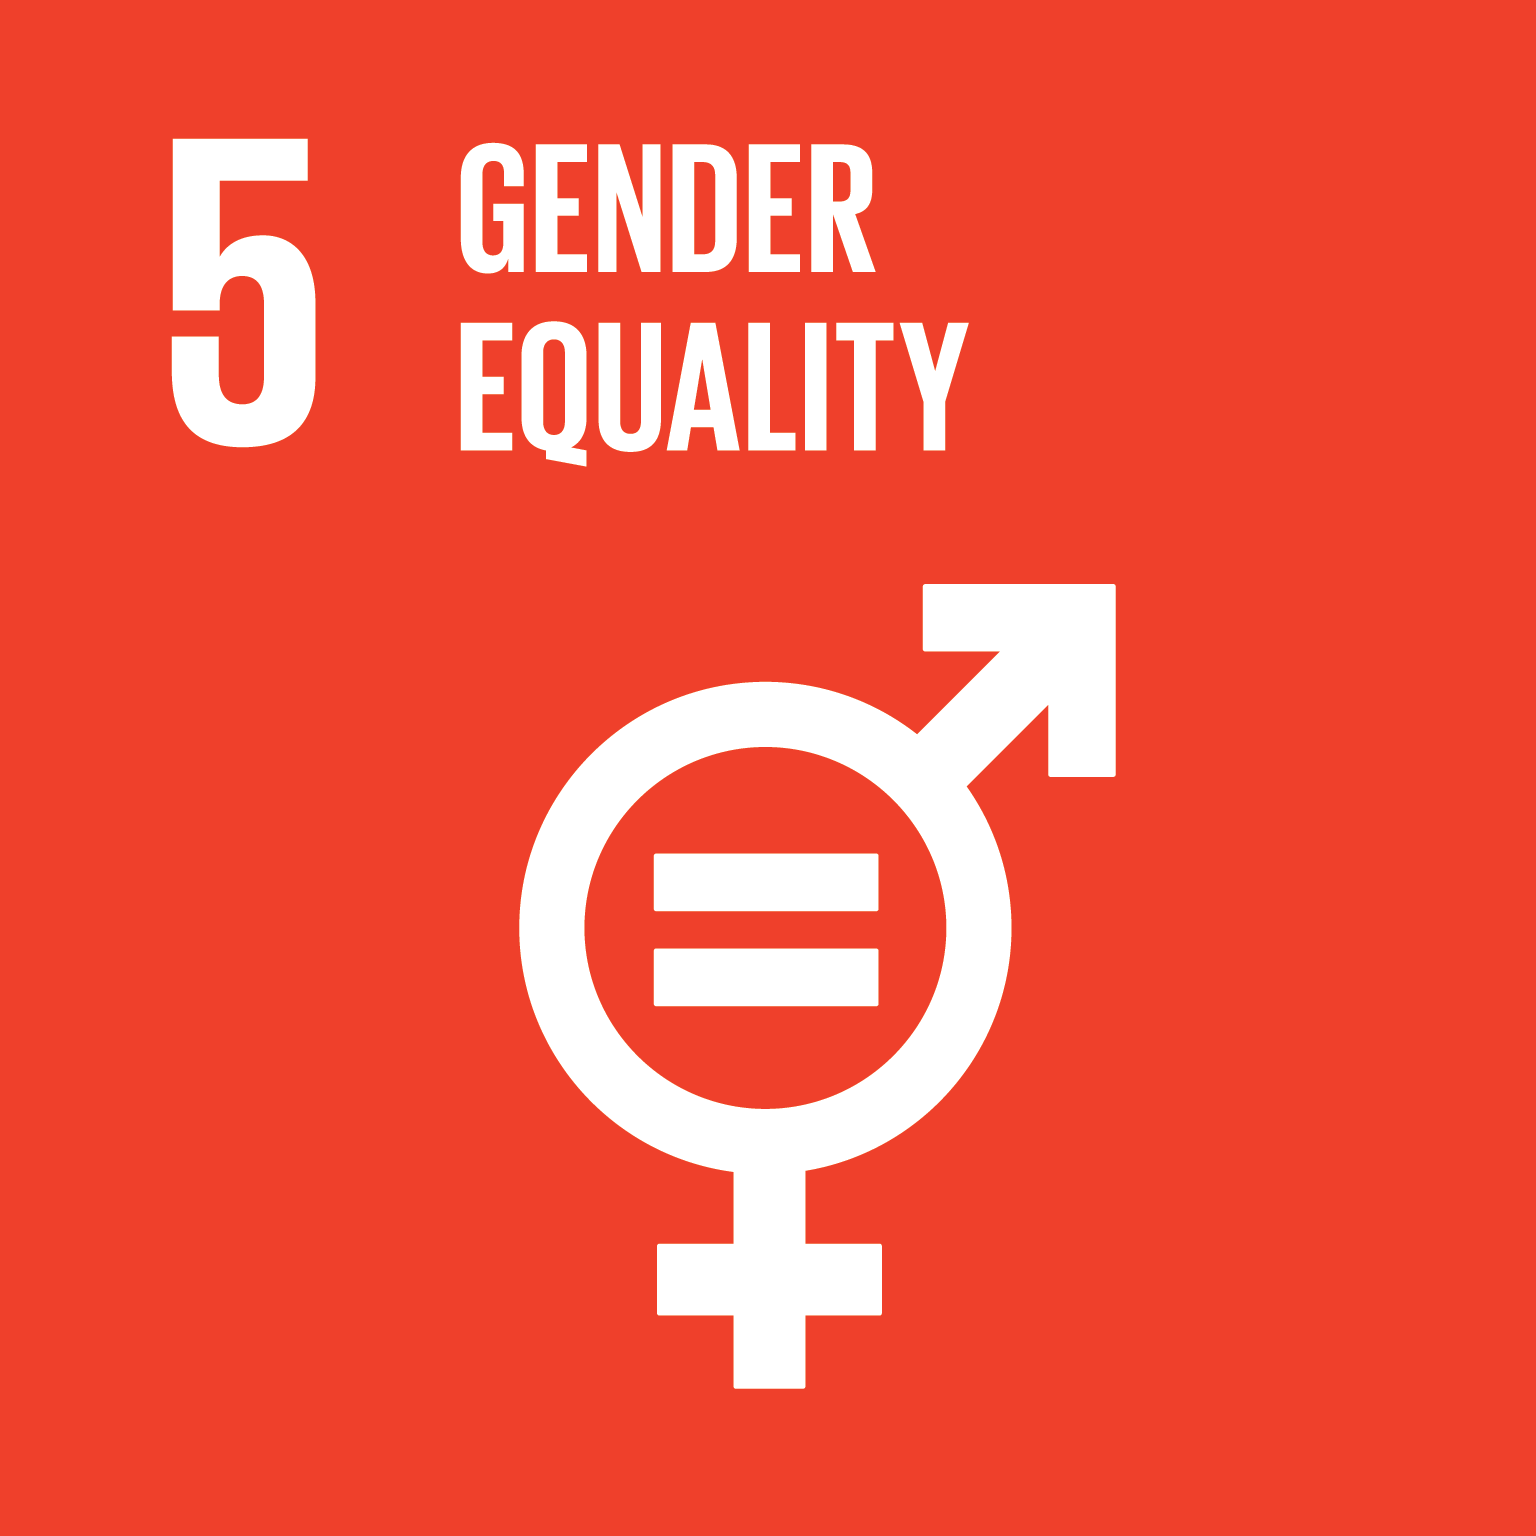 Sustainable Development Goal: Gender Equality